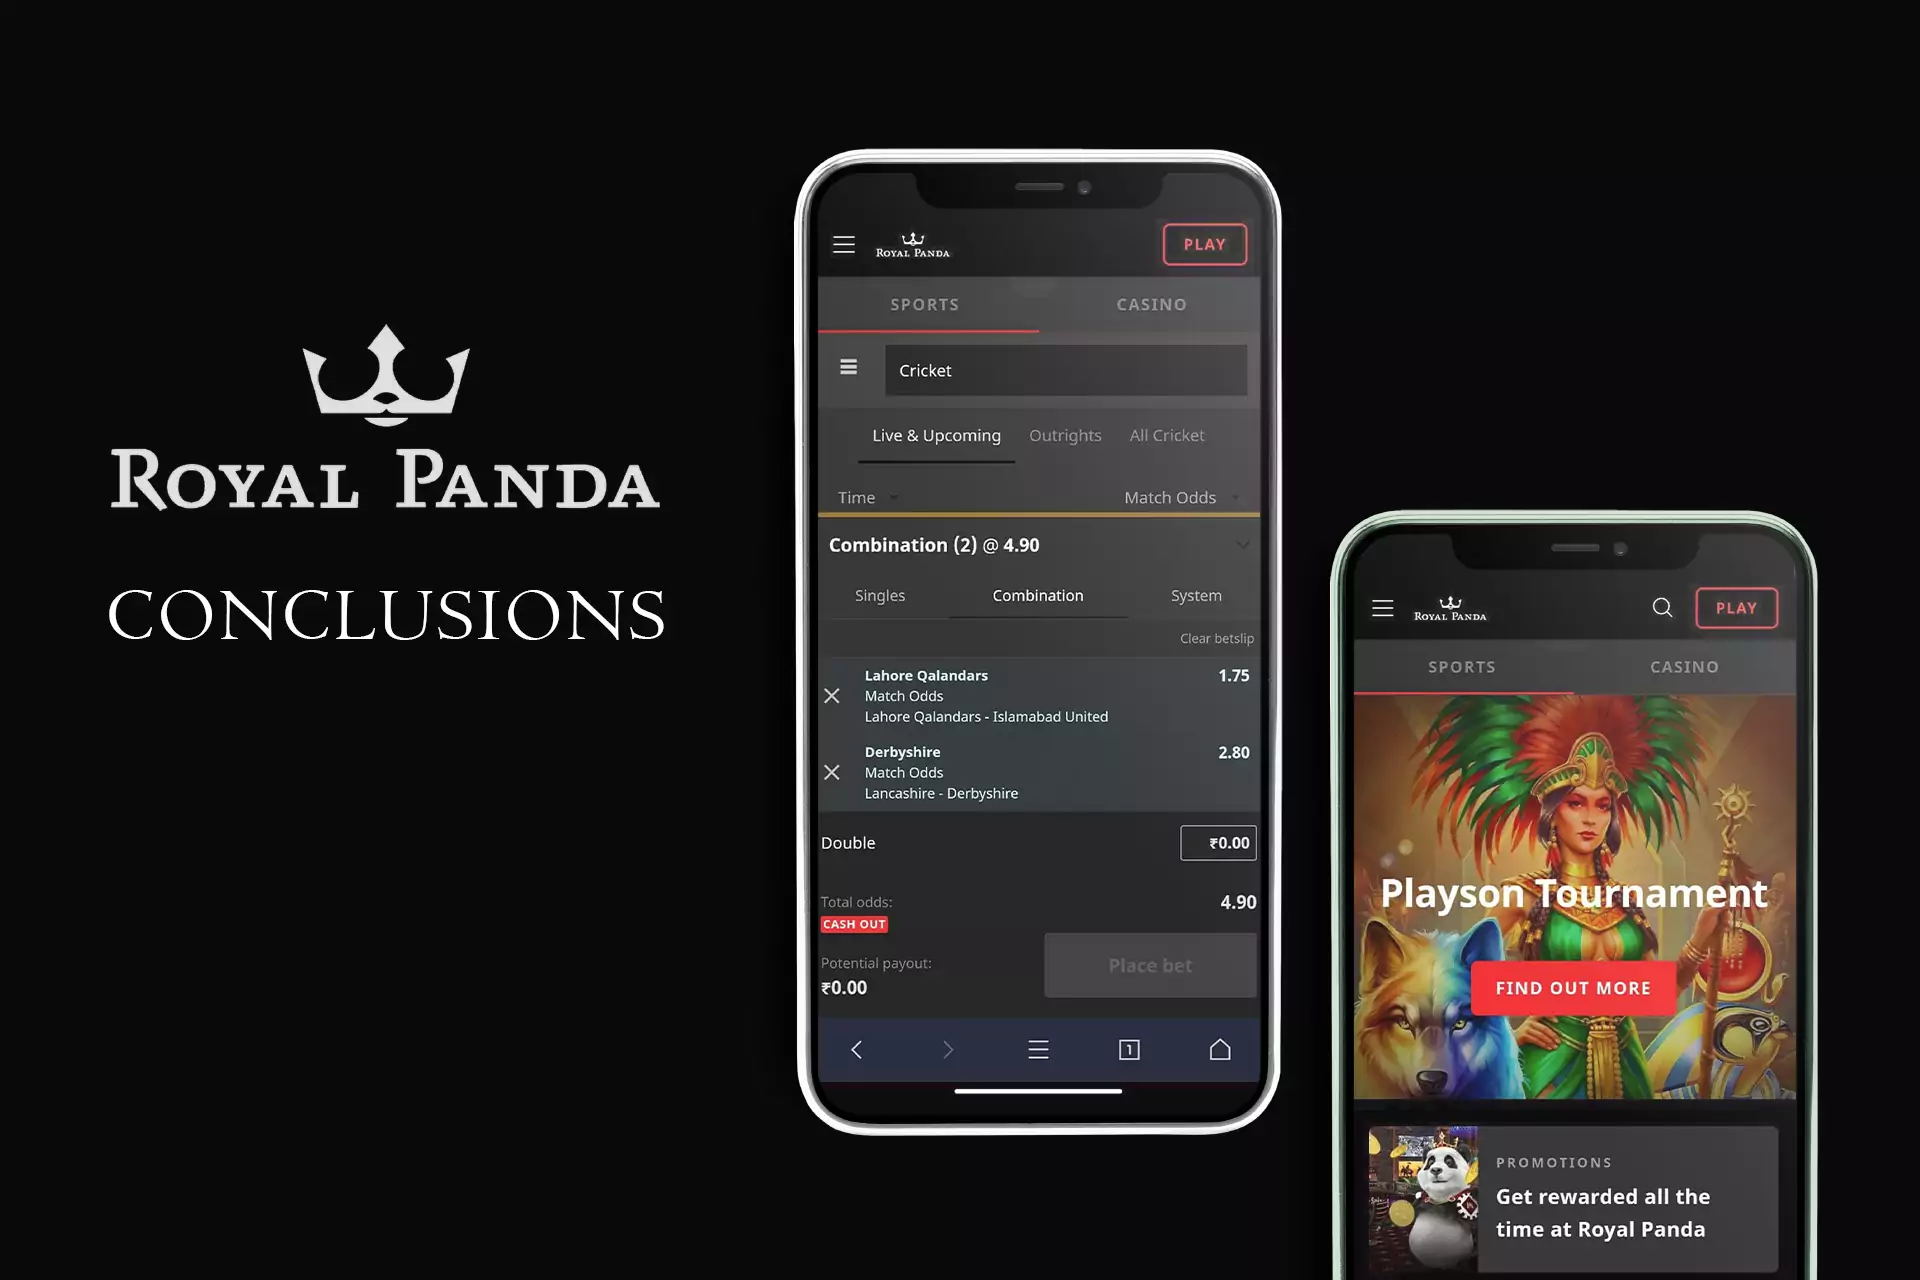 Read the conclusions about the quality of the Royal Panda app for Android and iOS.